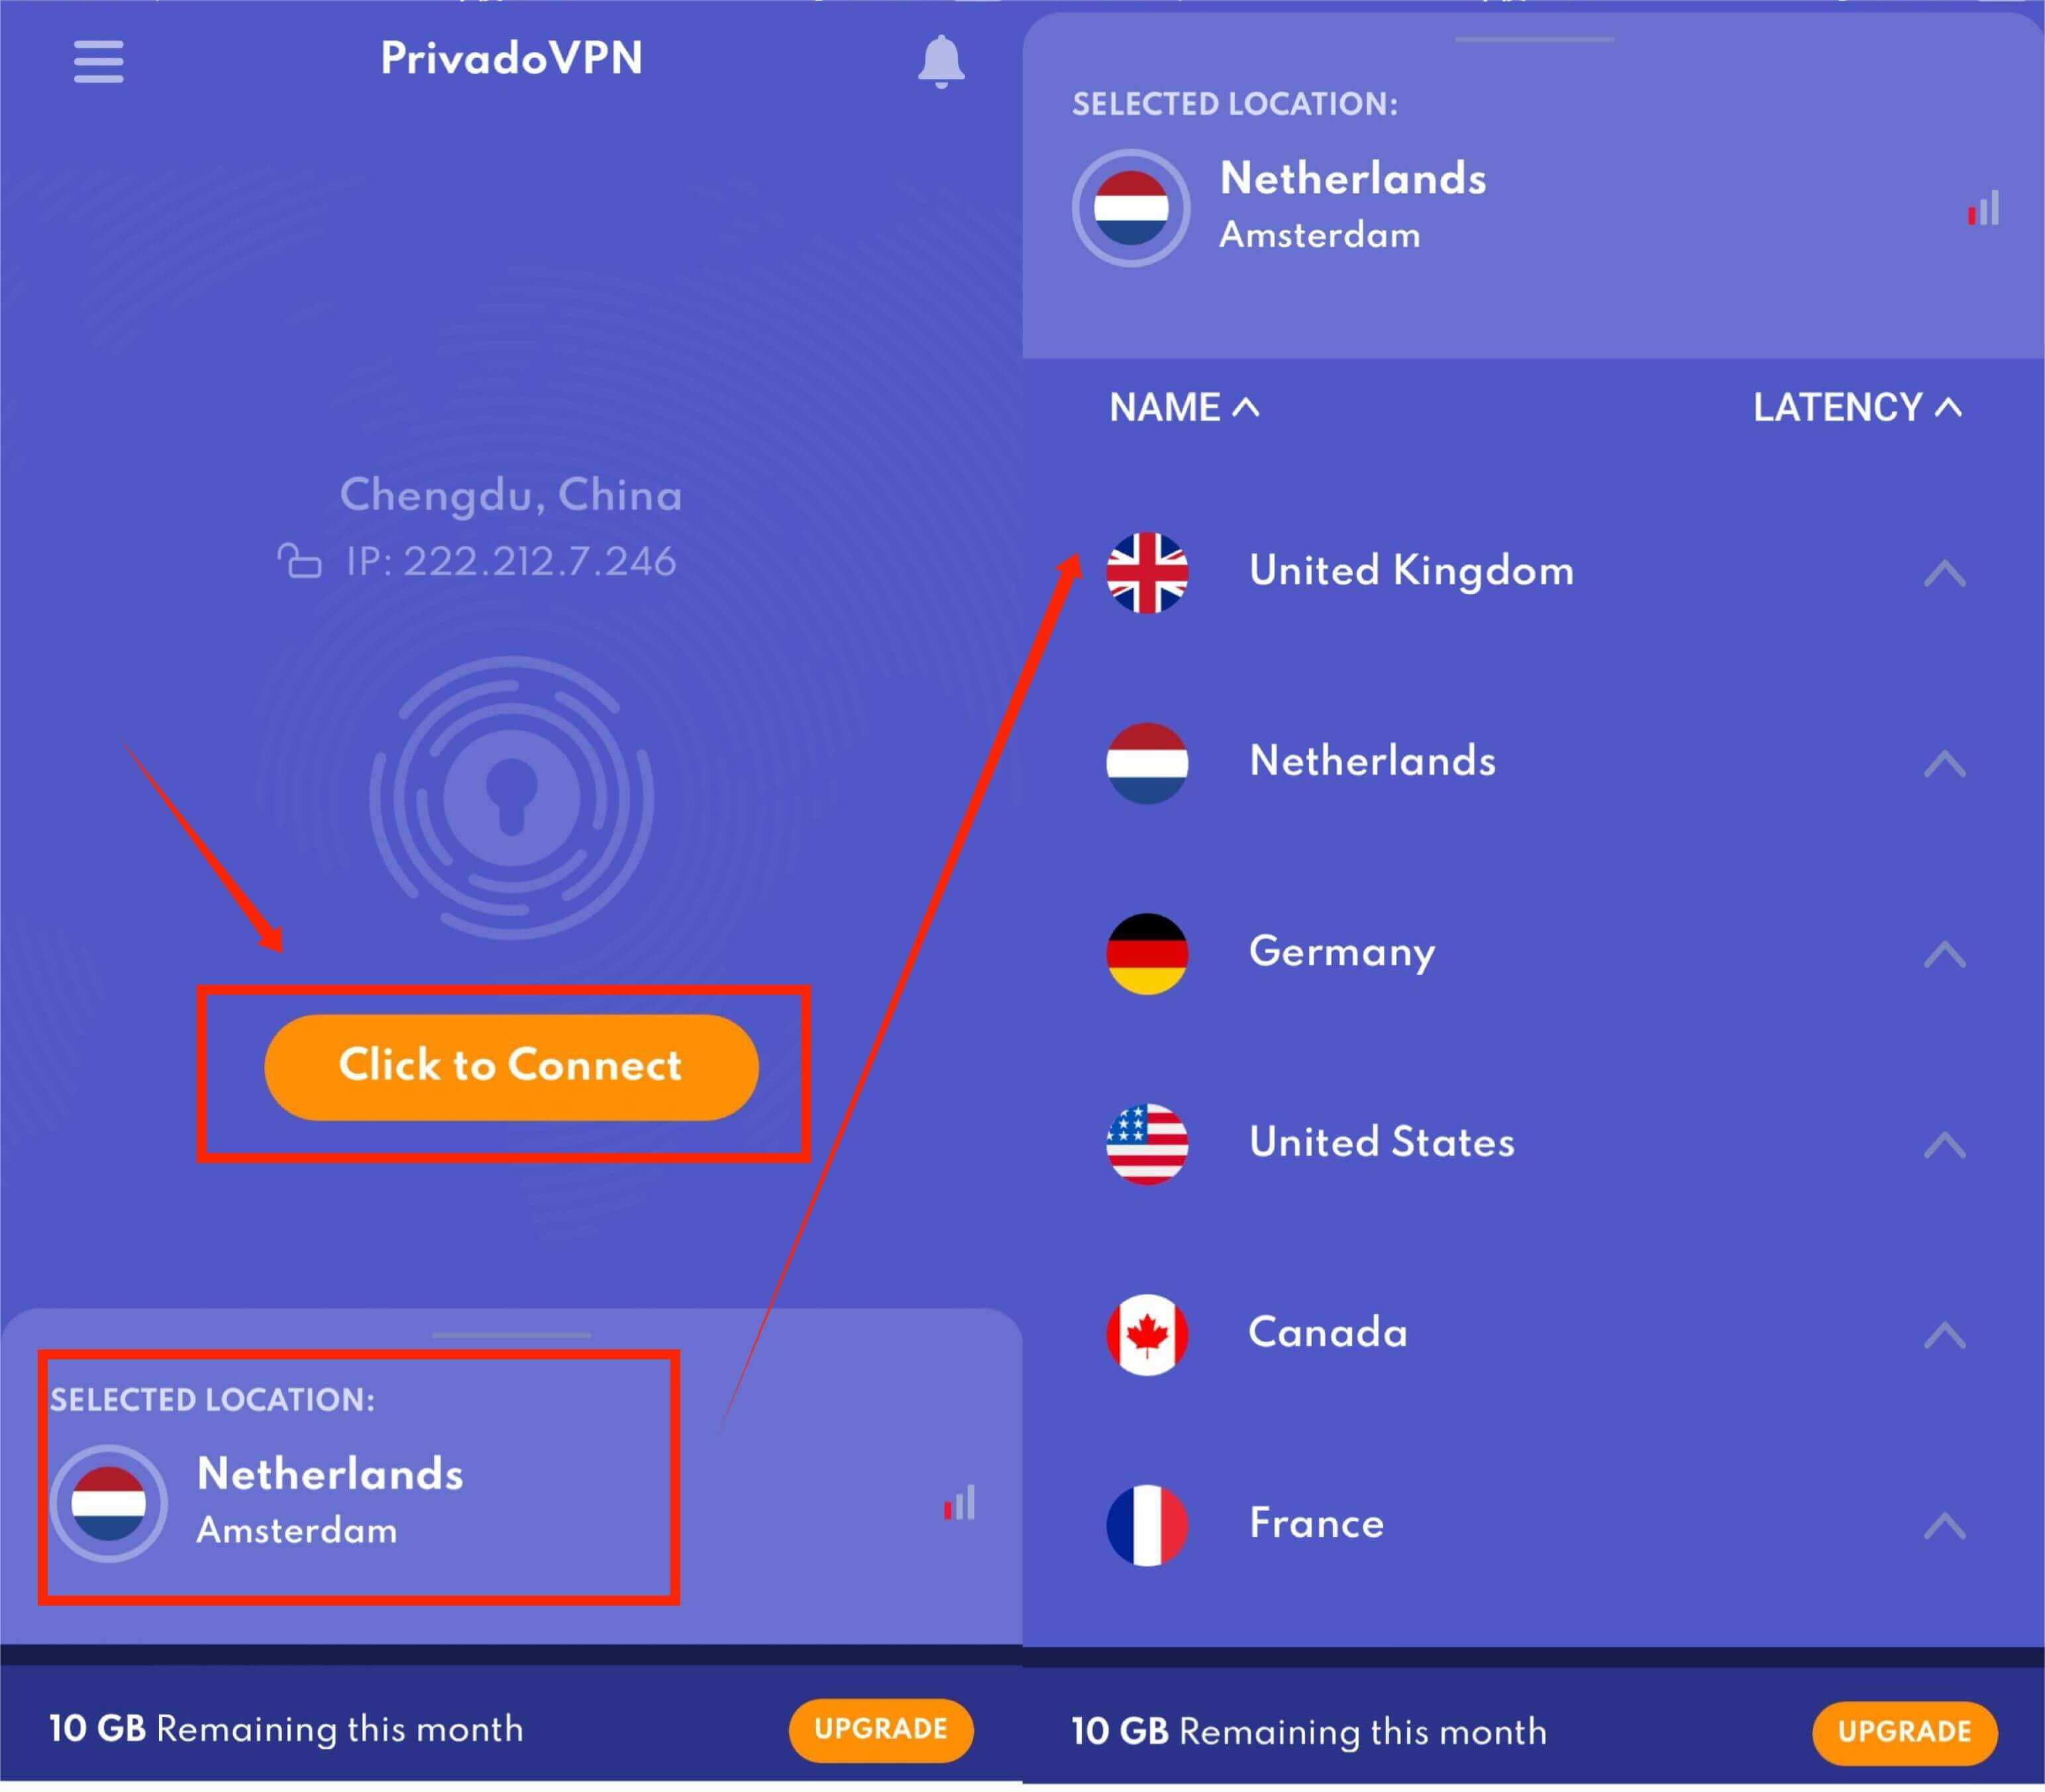 How to use VPN location changer ProvadoVPN